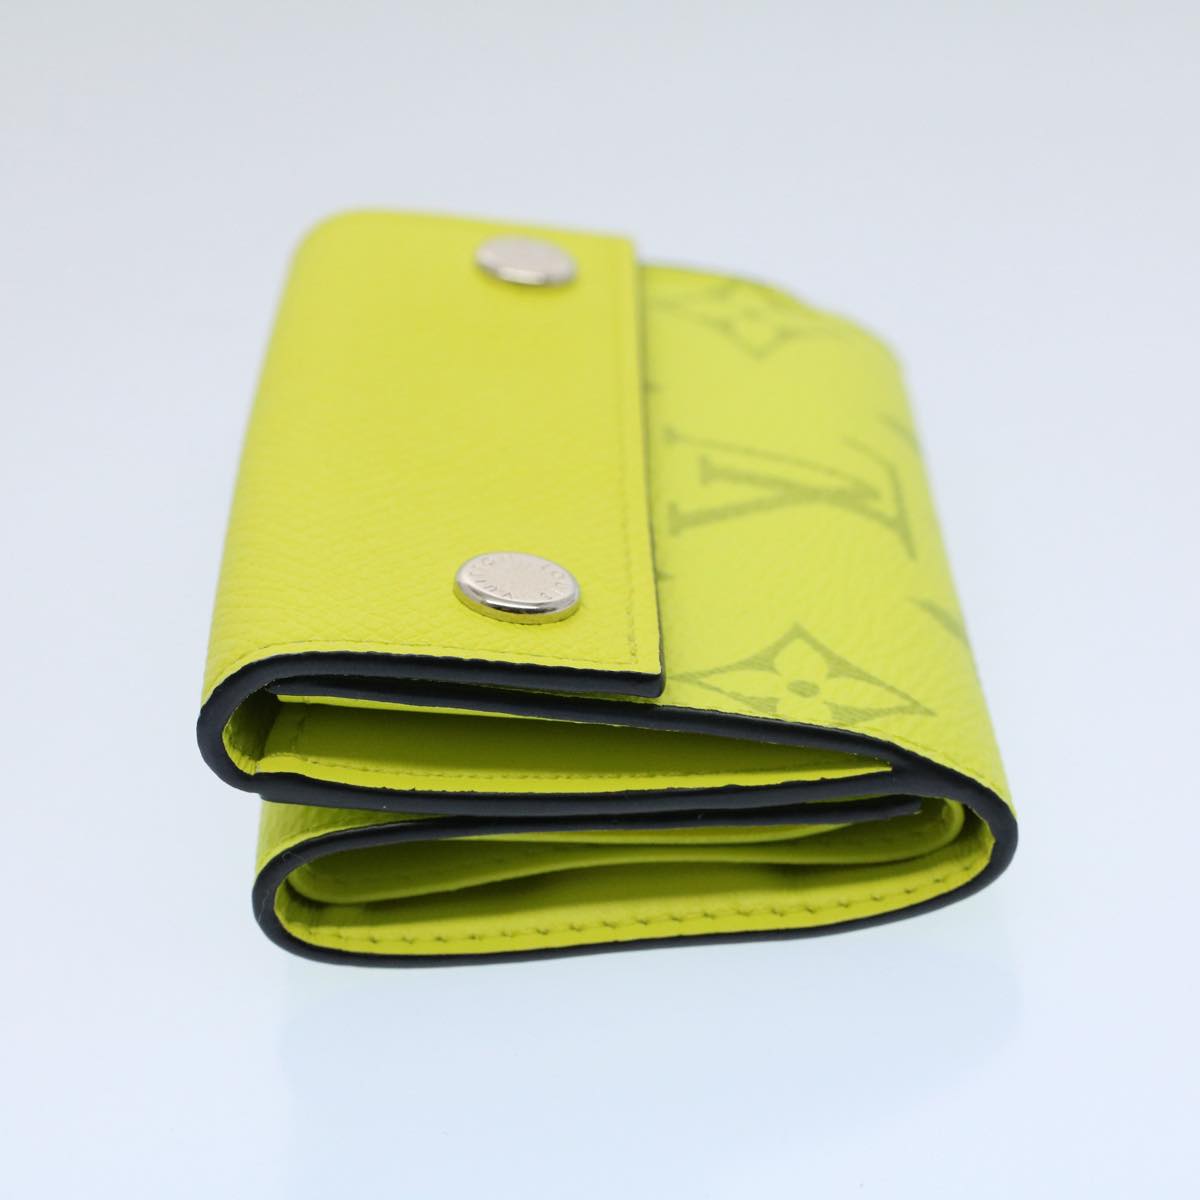 LOUIS VUITTON Taigalama Discovery Compact Wallet Jaune M67629 LV Auth ac2214